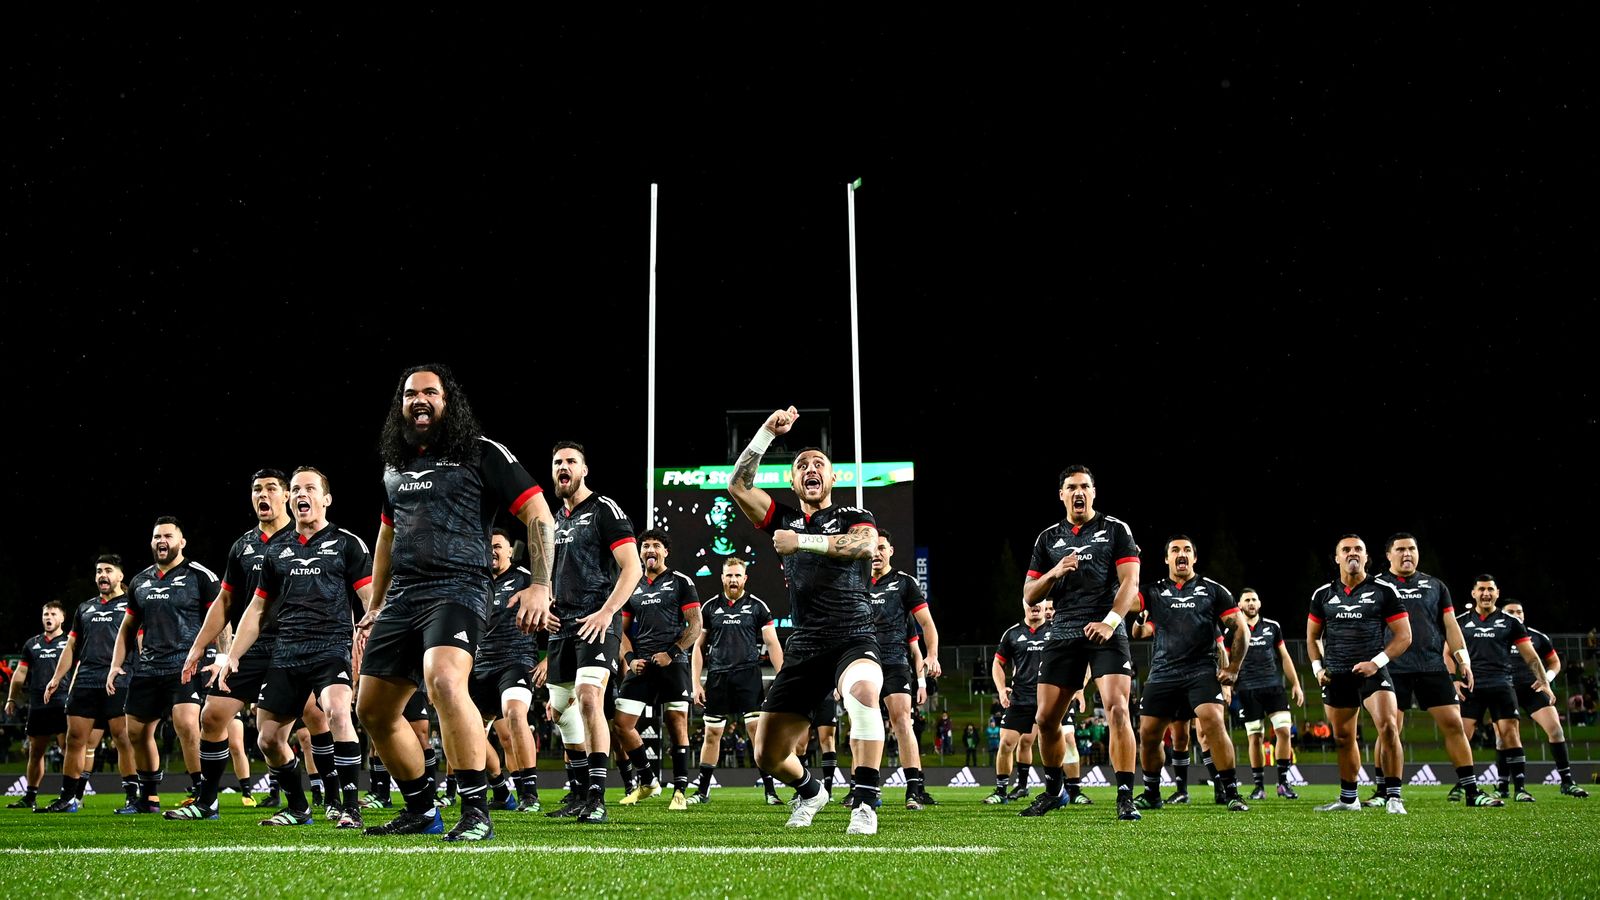 Maori All Blacks 32-17 Ireland: Dominant attacking display proves too much for Ireland